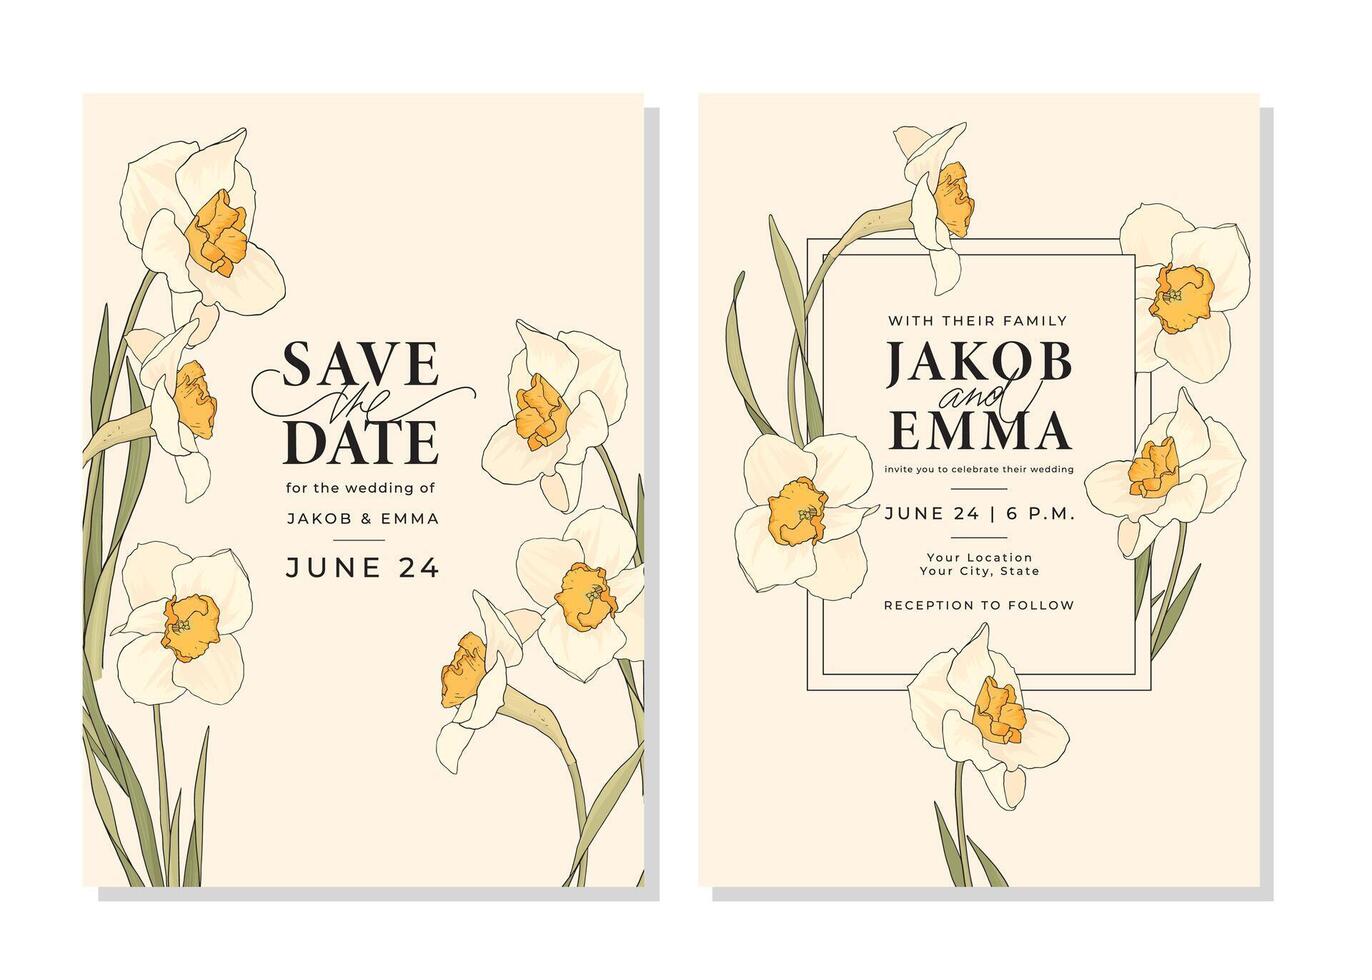 Set of wedding invitation cards. Templates with white daffodils. Vintage botanical pattern with flowers. Save the date. Layout design with retro illustration with outline vector